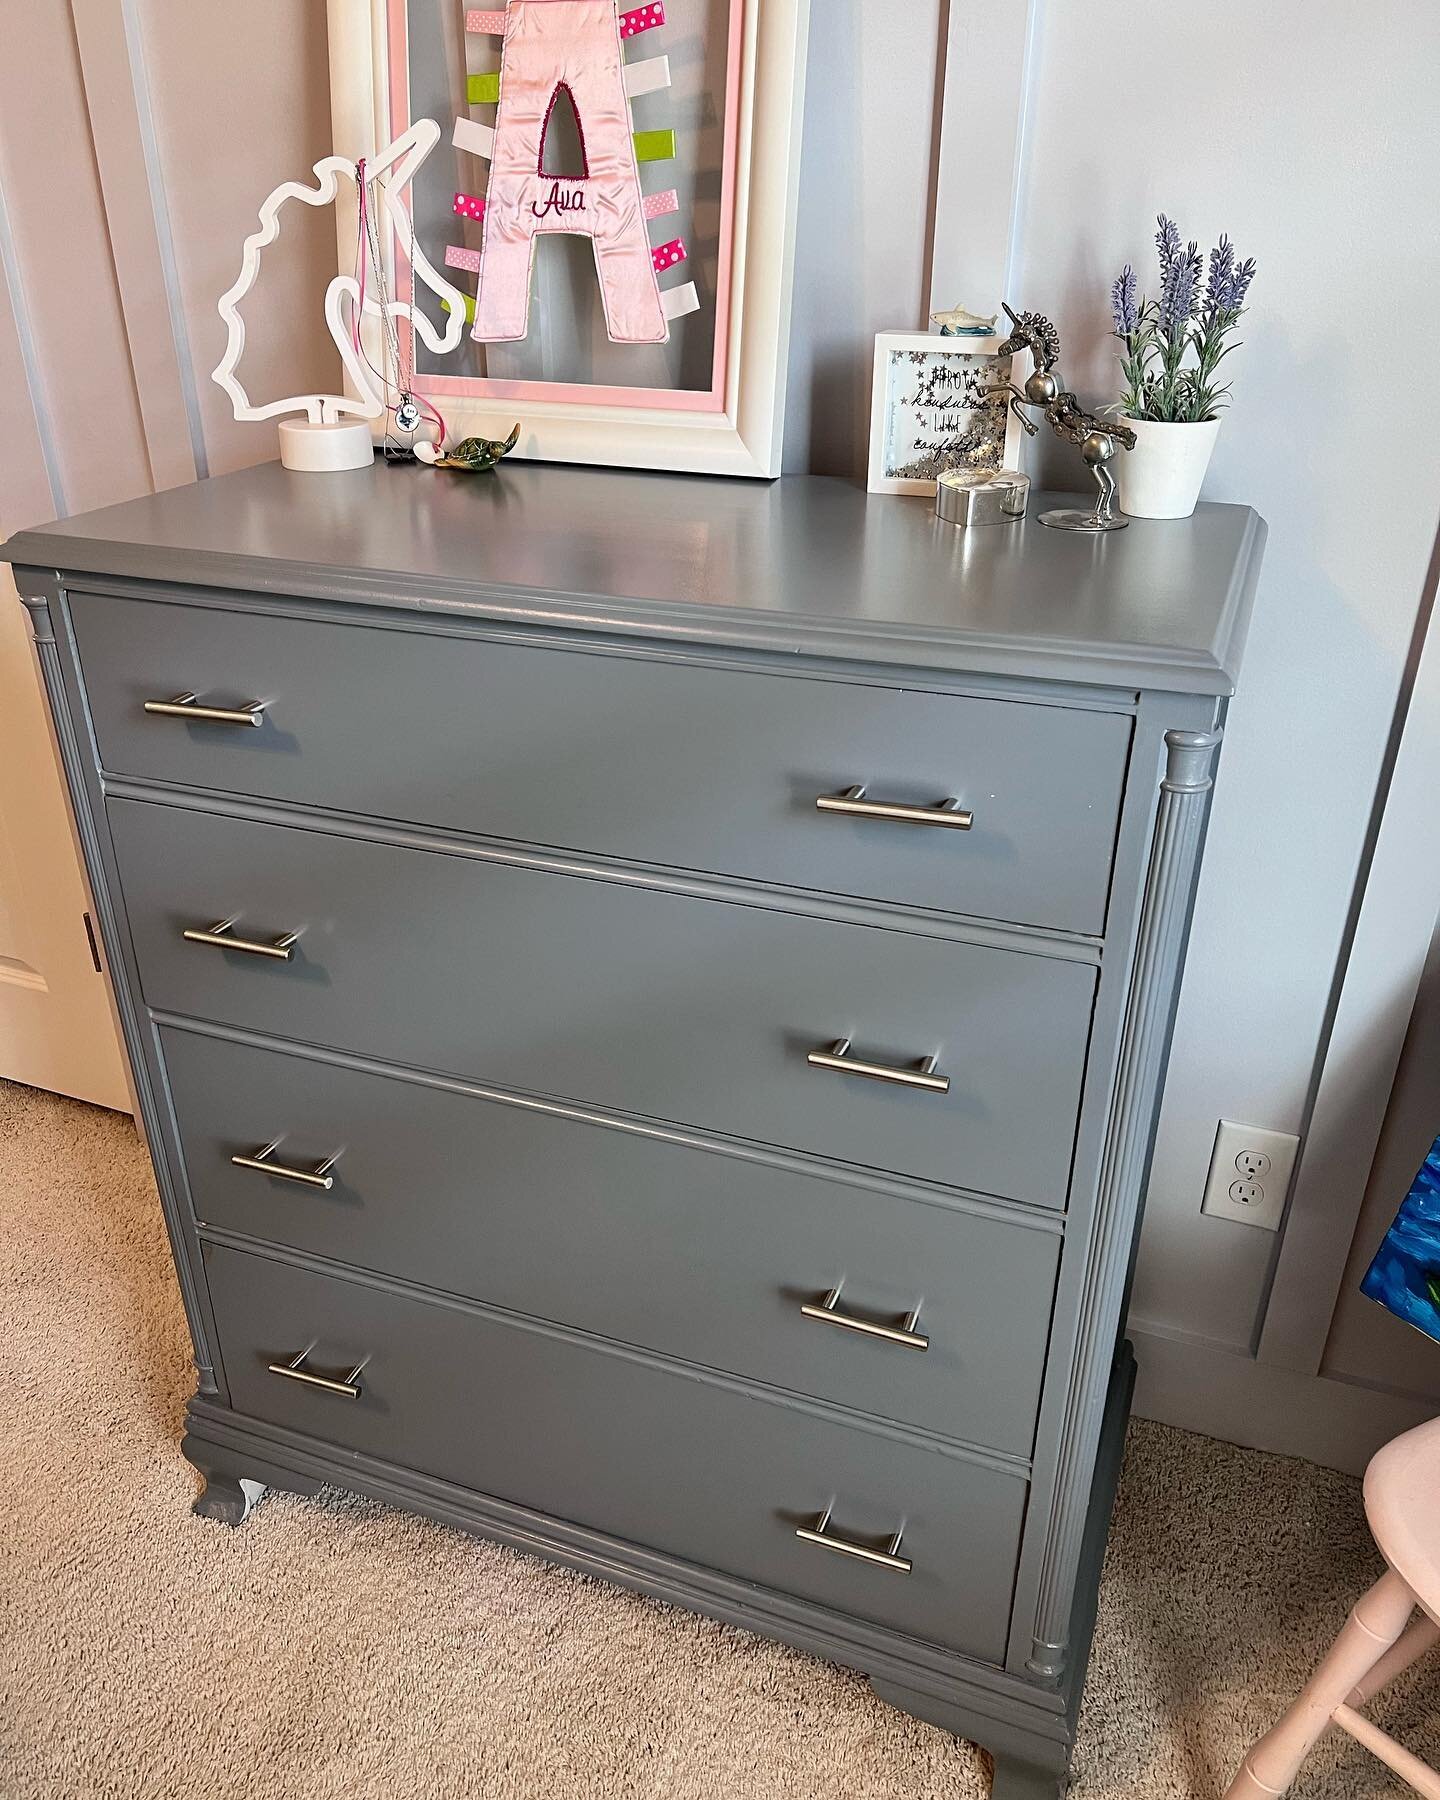 So I just realized I posted several stories last week on updating my daughter&rsquo;s bedroom and refreshing her dresser&hellip; Which have all since expired. 🤷&zwj;♀️
.
But &hellip;. I never showed the finished room or updated dresser. Here&rsquo;s